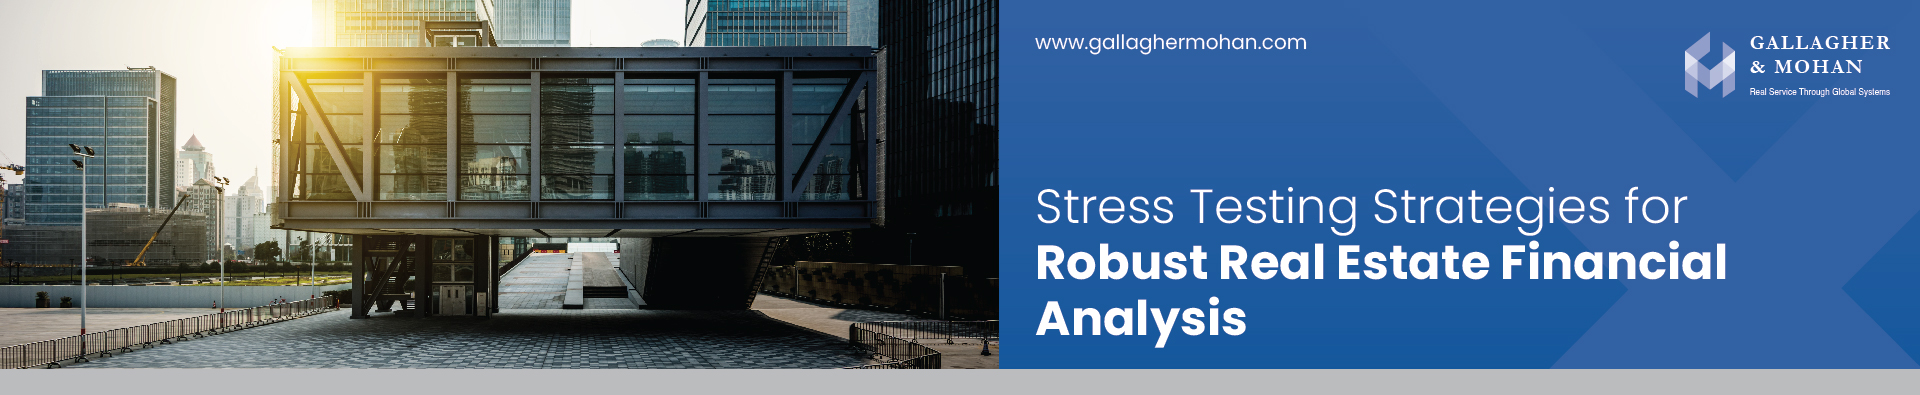 Stress Testing Strategies For Robust Real Estate Financial Analysis